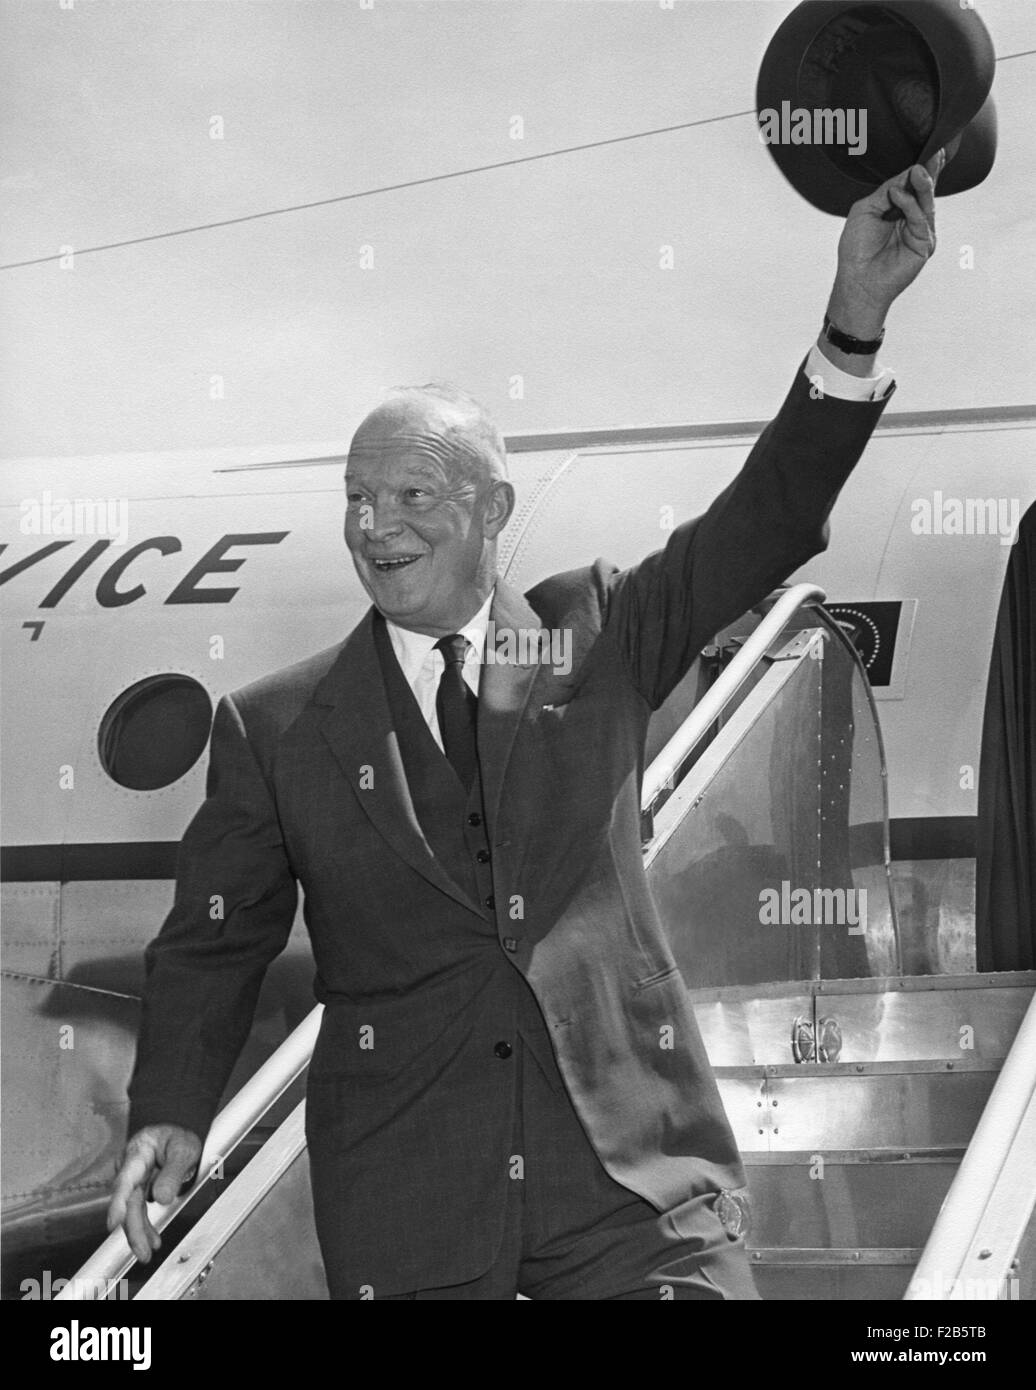 President Eisenhower waving his hat from airplane steps. He was leaving Washington D.C. for a New England trip. June 22, 1955. - (BSLOC 2014 16 58) Stock Photo